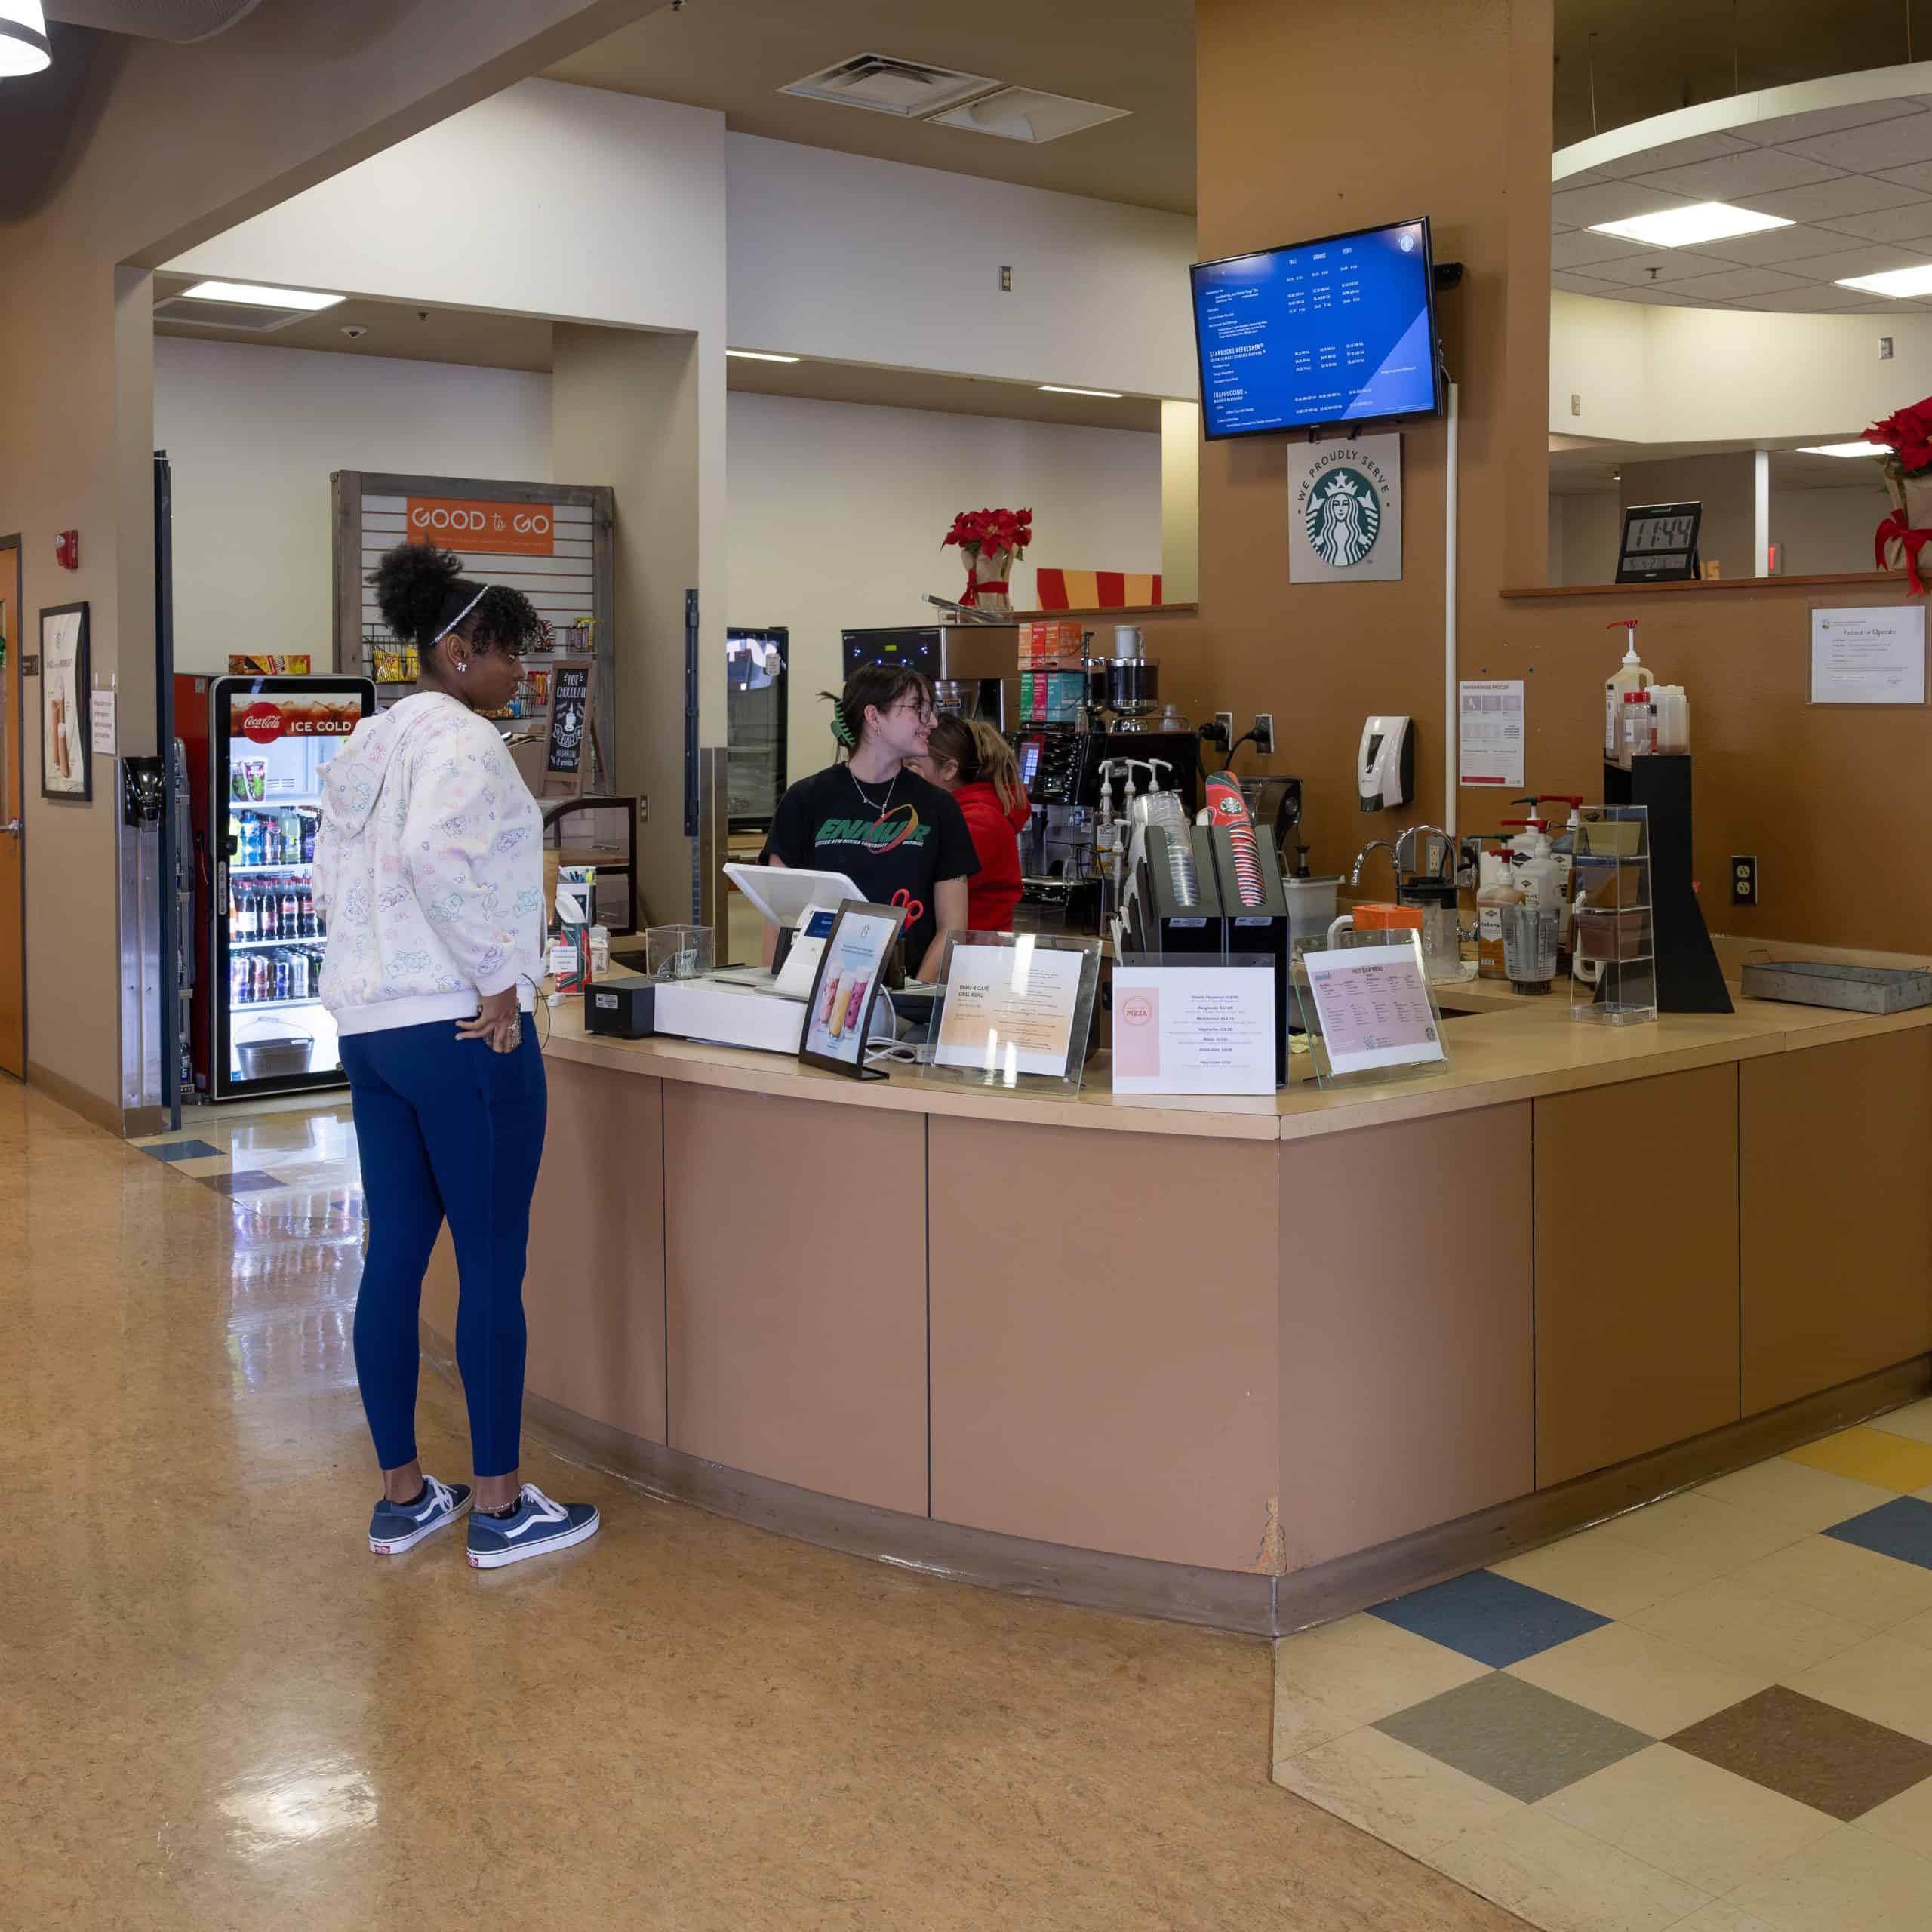 When you arrive at the Eastern New Mexico University - Roswell's Campus Union Building you will be greeted by the friendly Dining Services staff at the centrally located coffee bar